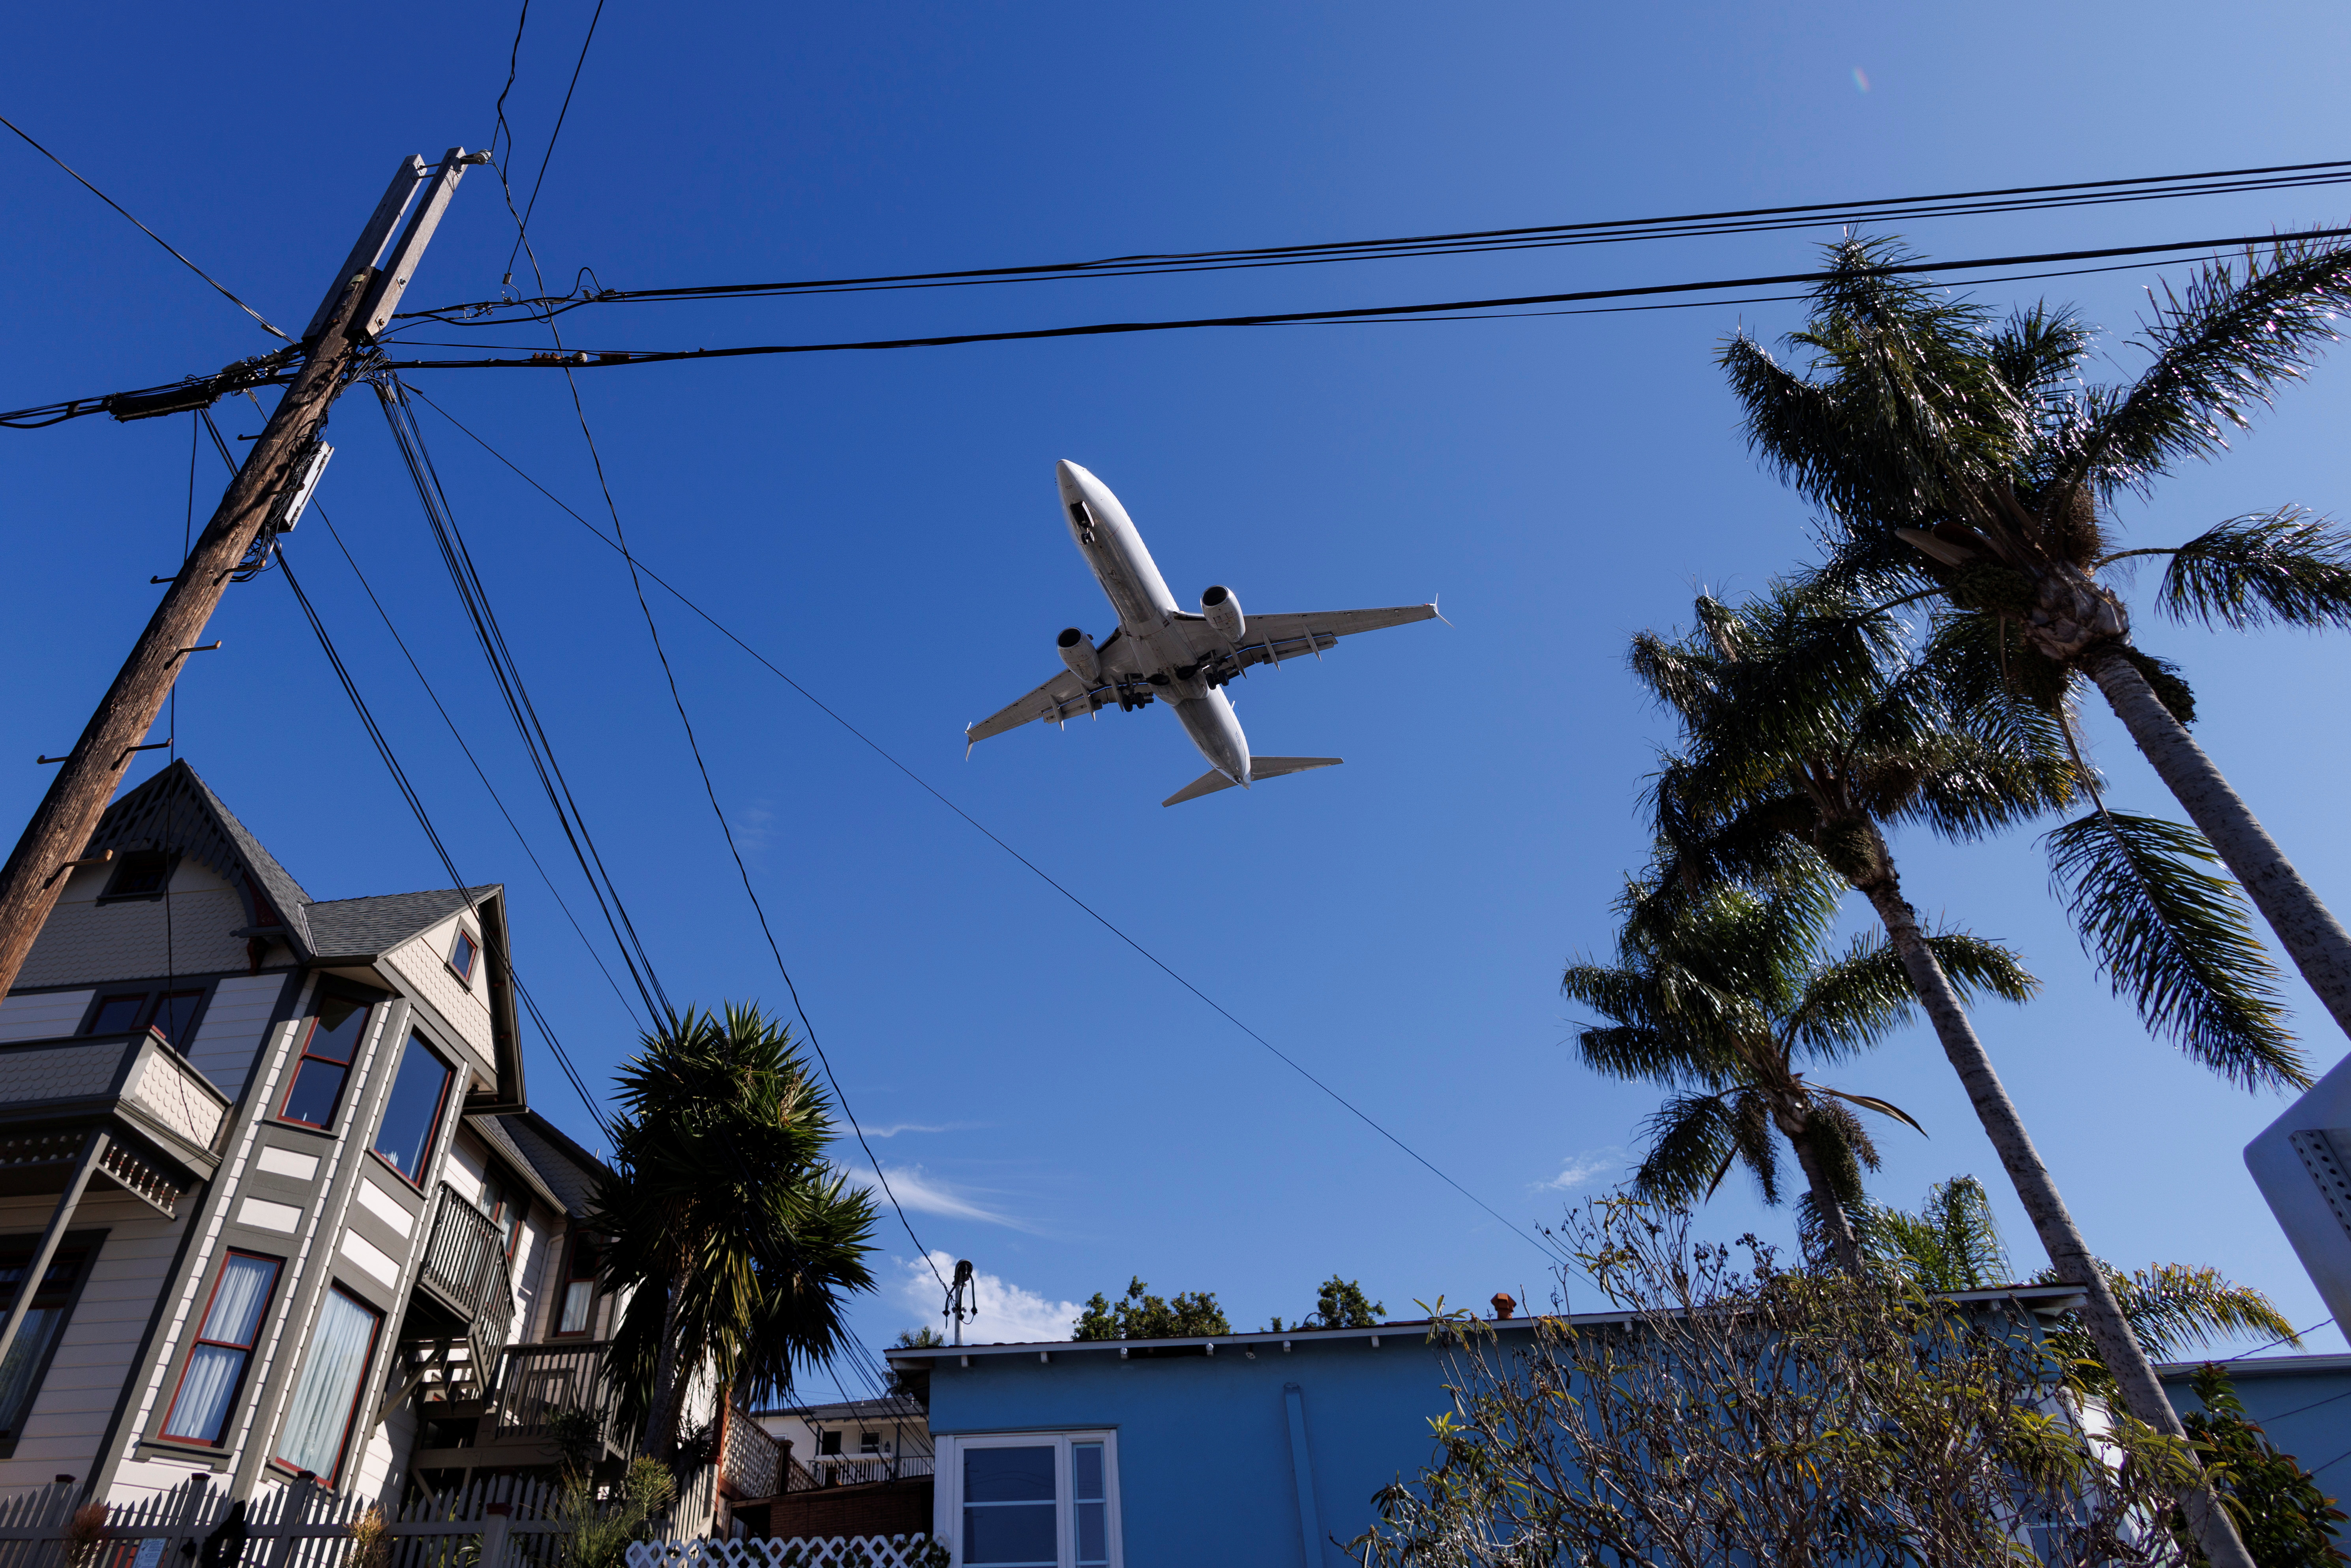 Aircraft approaches to land in San Diego as 5G talks continue with telcoms